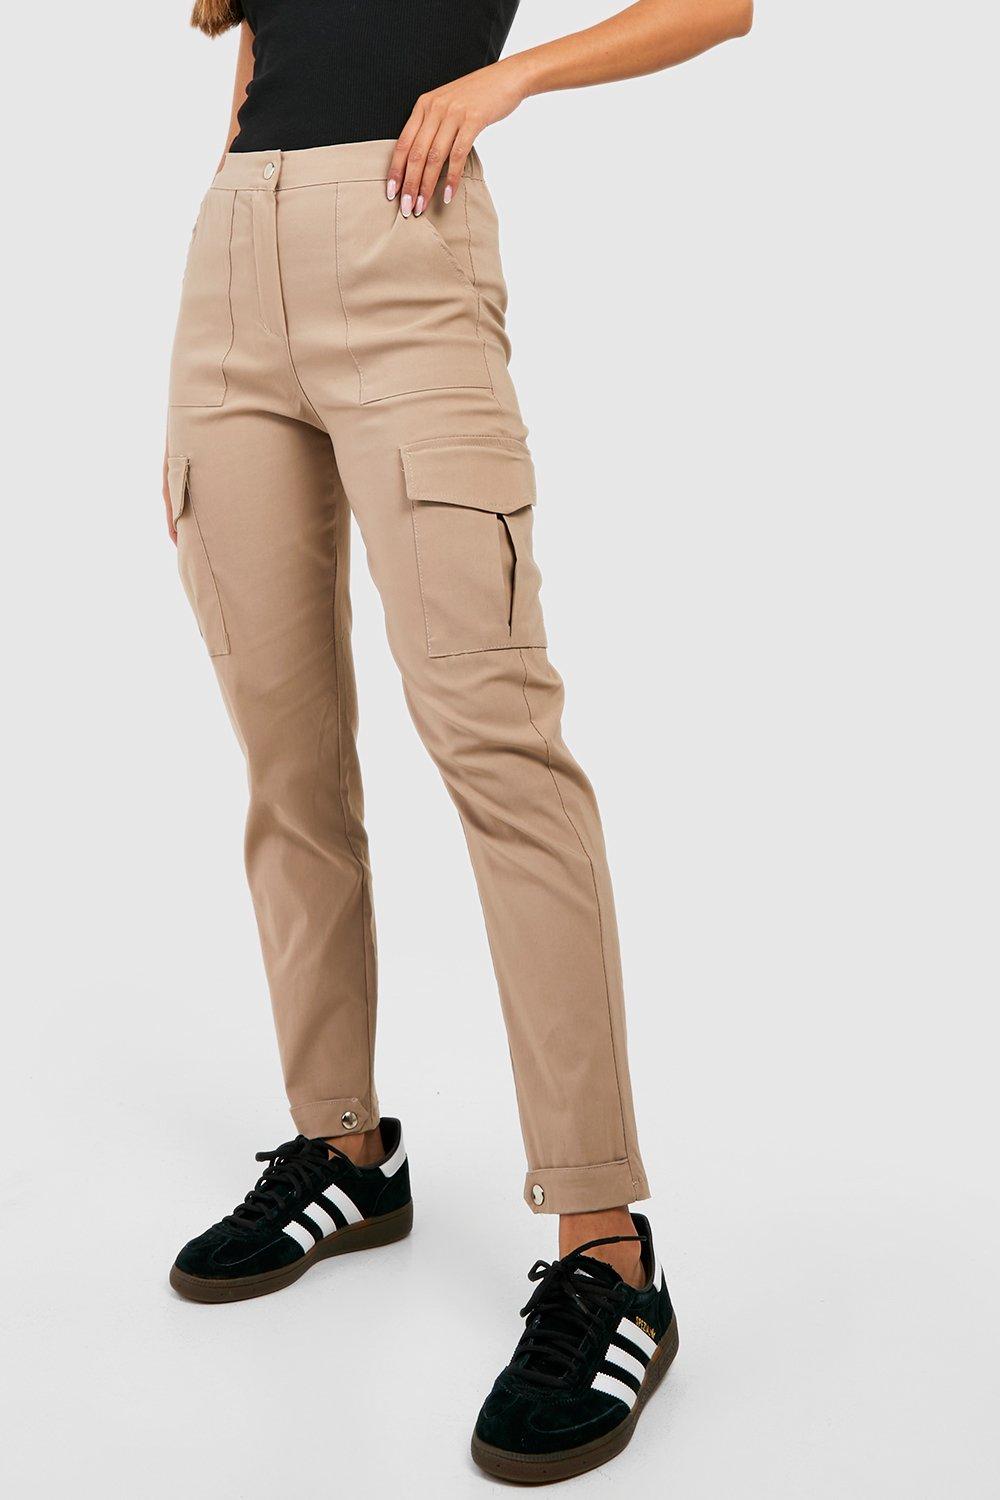 Stretch Woven Pocket Cargo Casual Pants